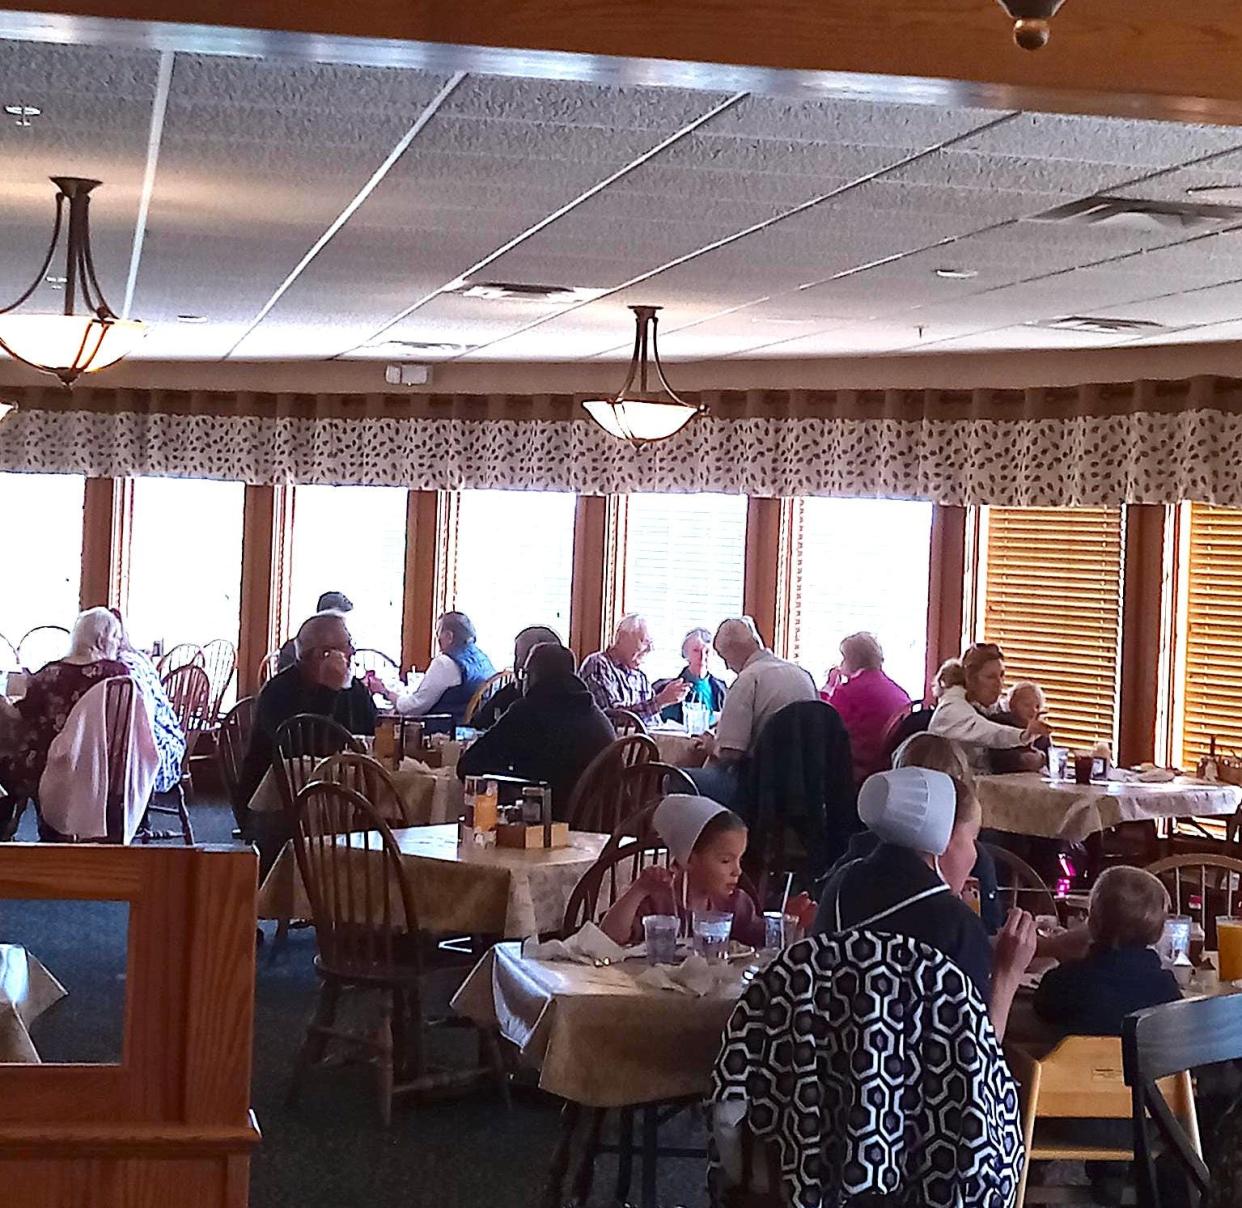 Not only is Der Dutchman famous for its great food and friendly service, but diners can enjoy a breathtaking view of the Holmes County countryside from the restaurant as well.